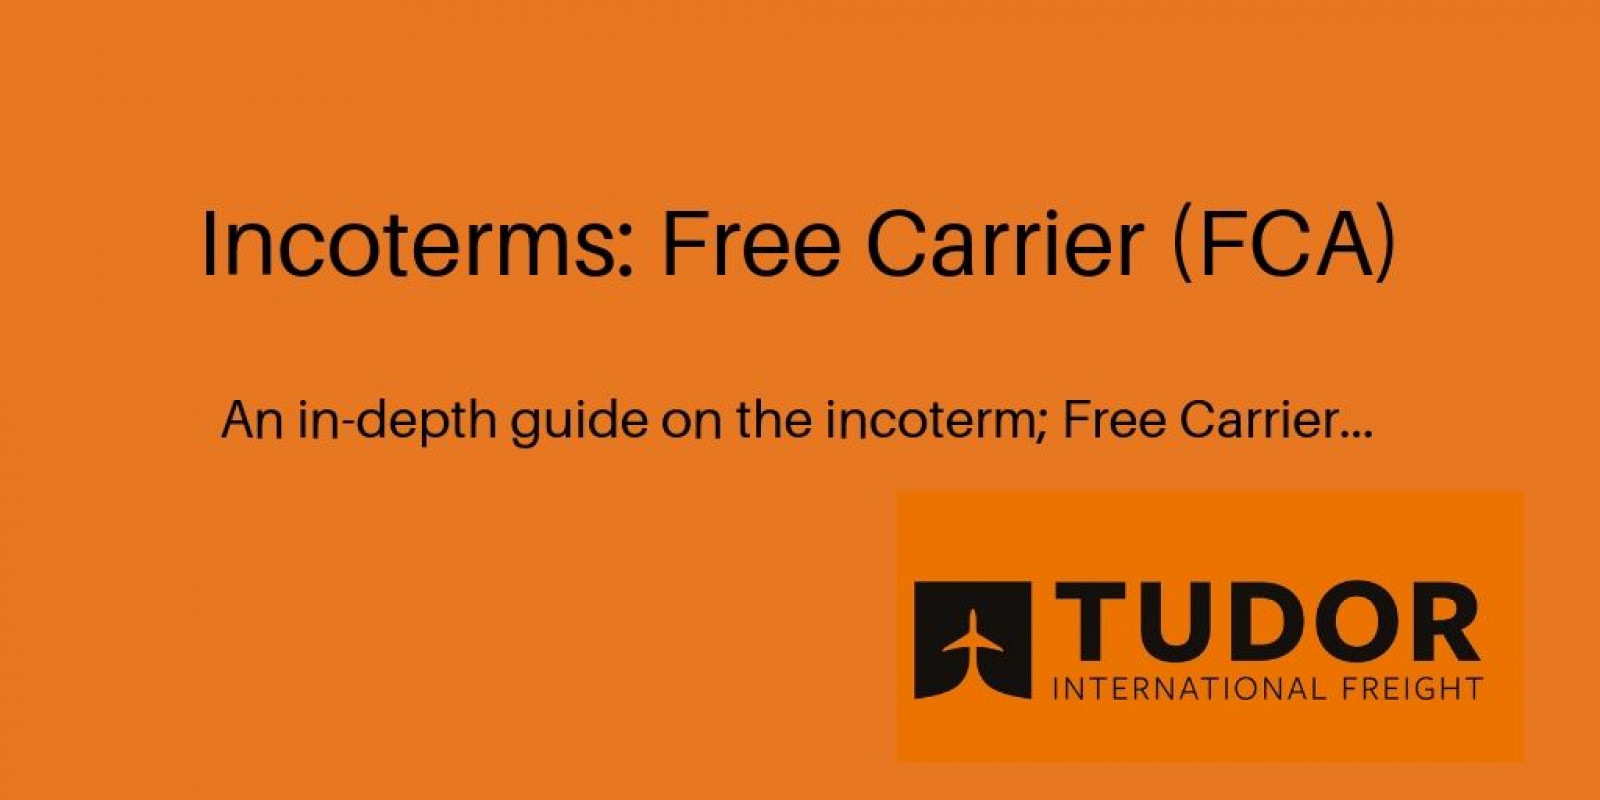 Incoterms: Free Carrier (FCA)